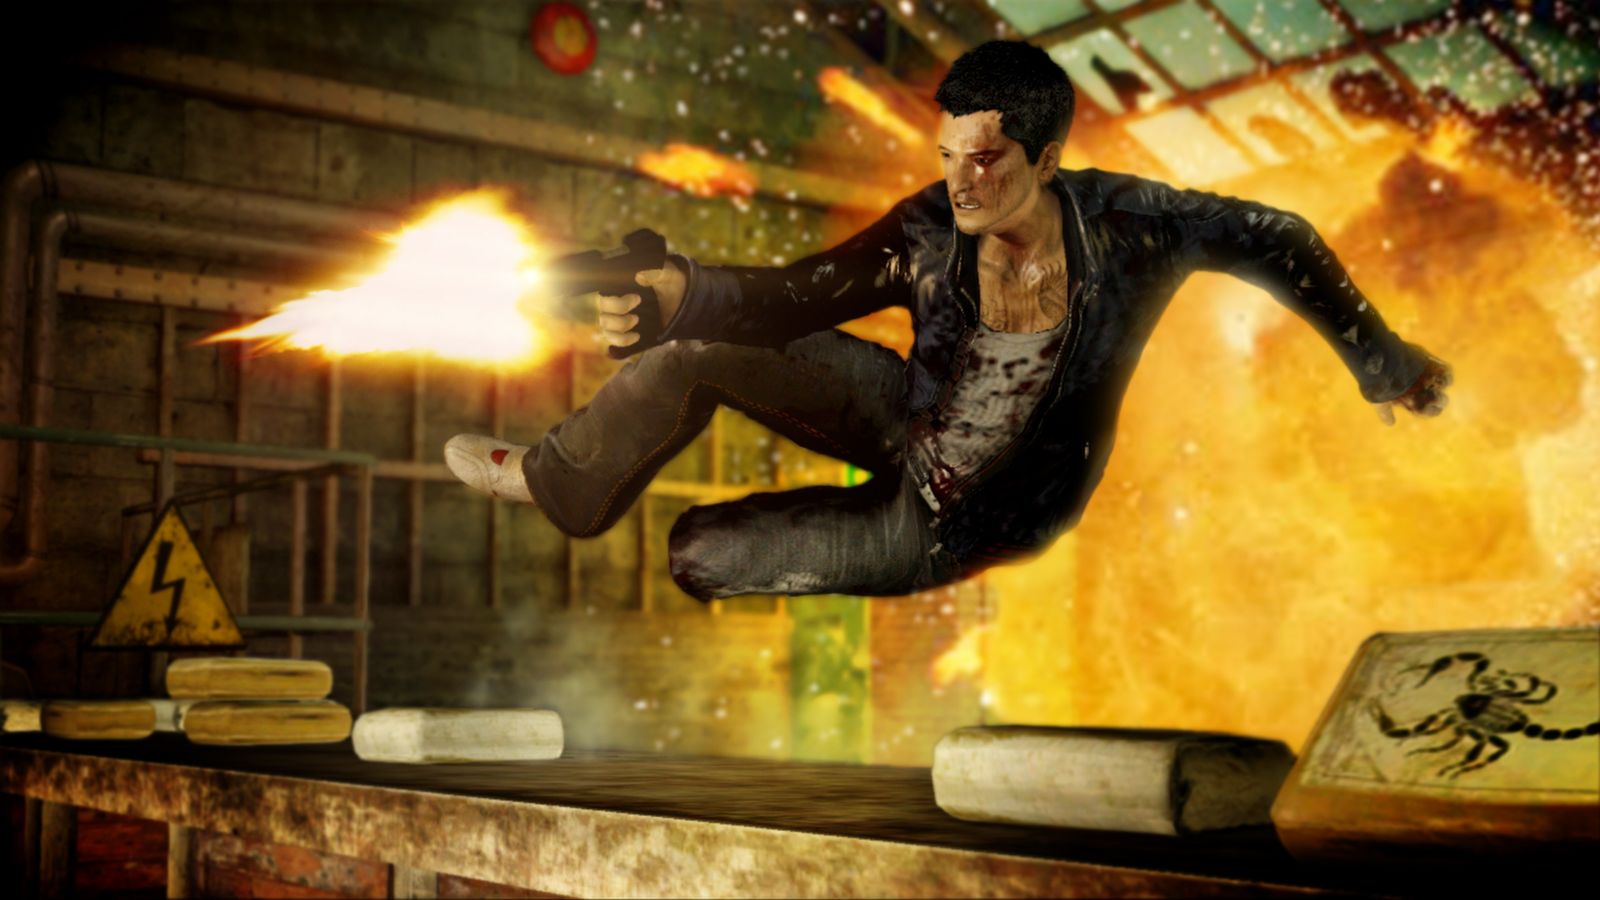 In-game image from Sleeping Dogs of a character jumping over a counter firing a gun.